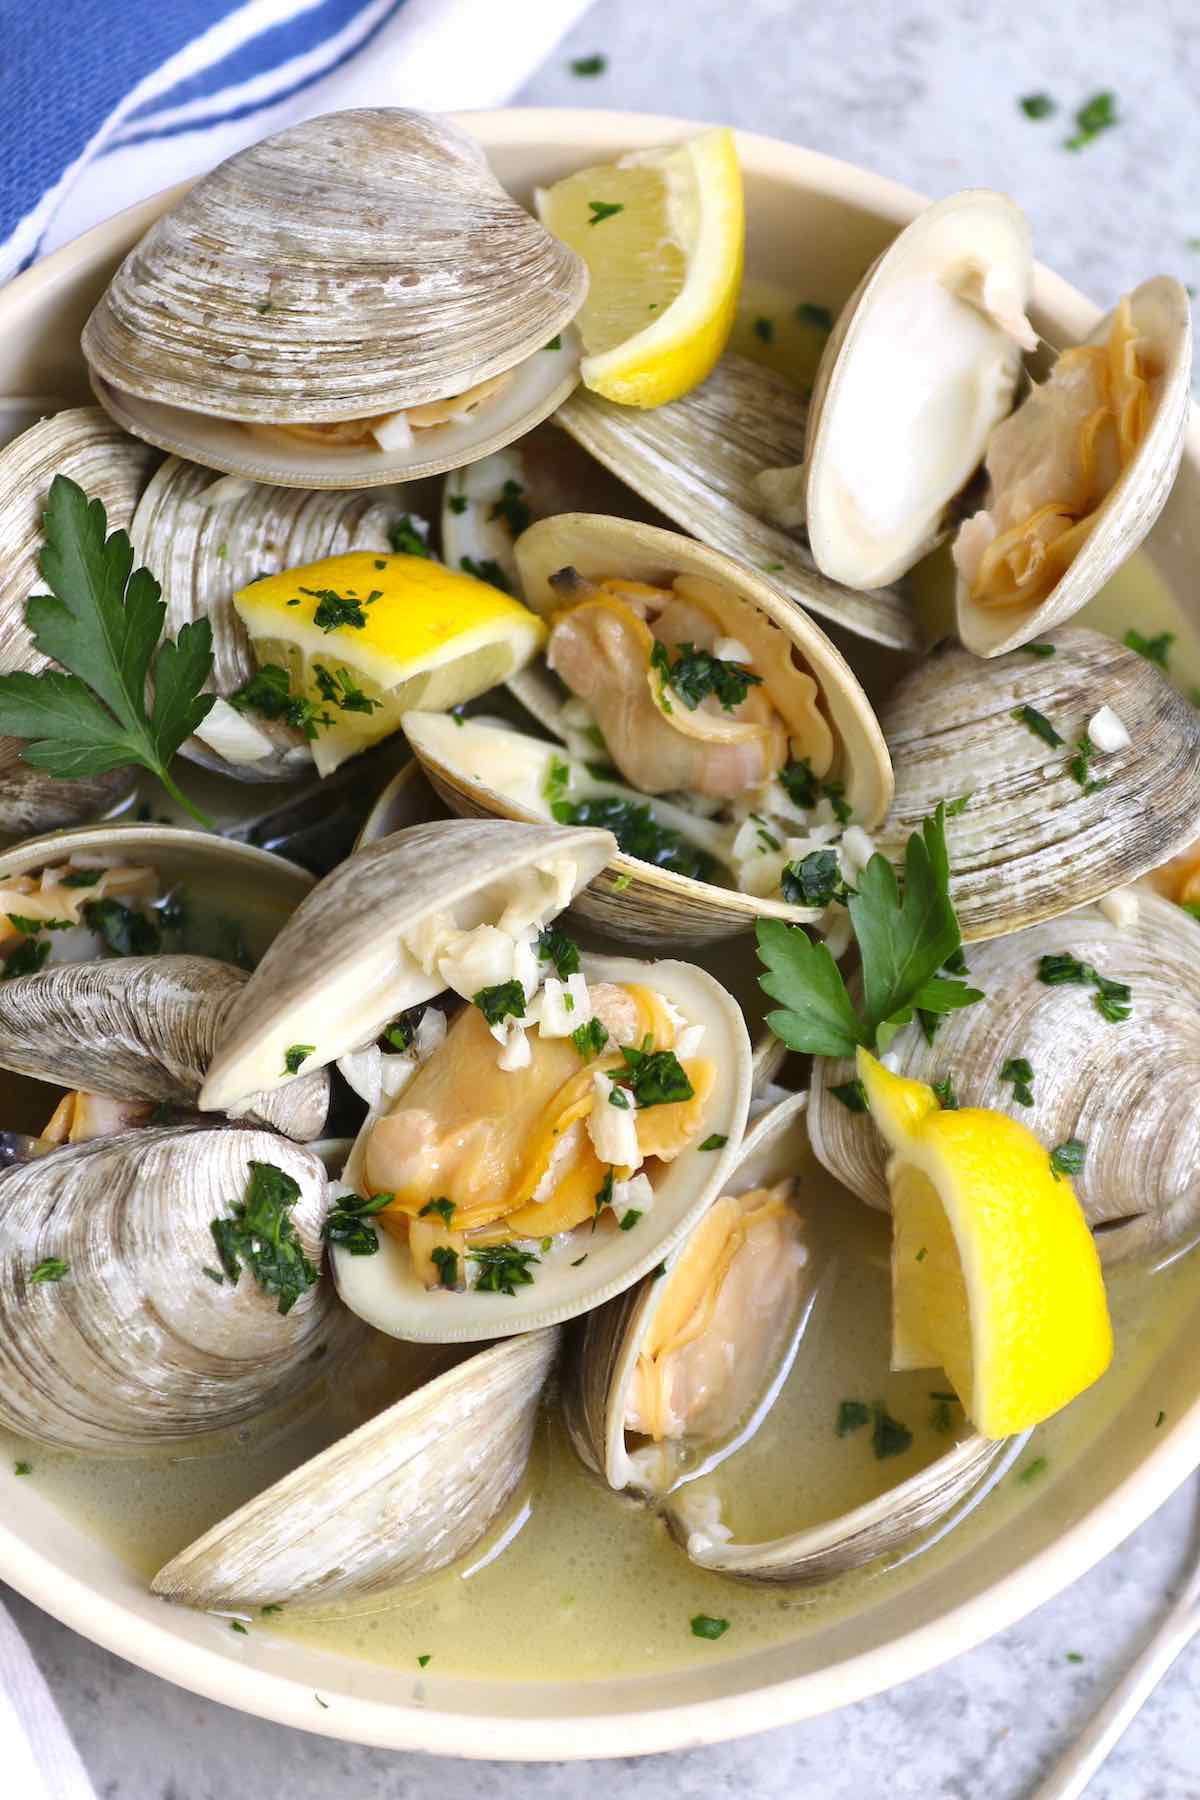 A serving of little neck clams with lemon wedges and fresh herbs